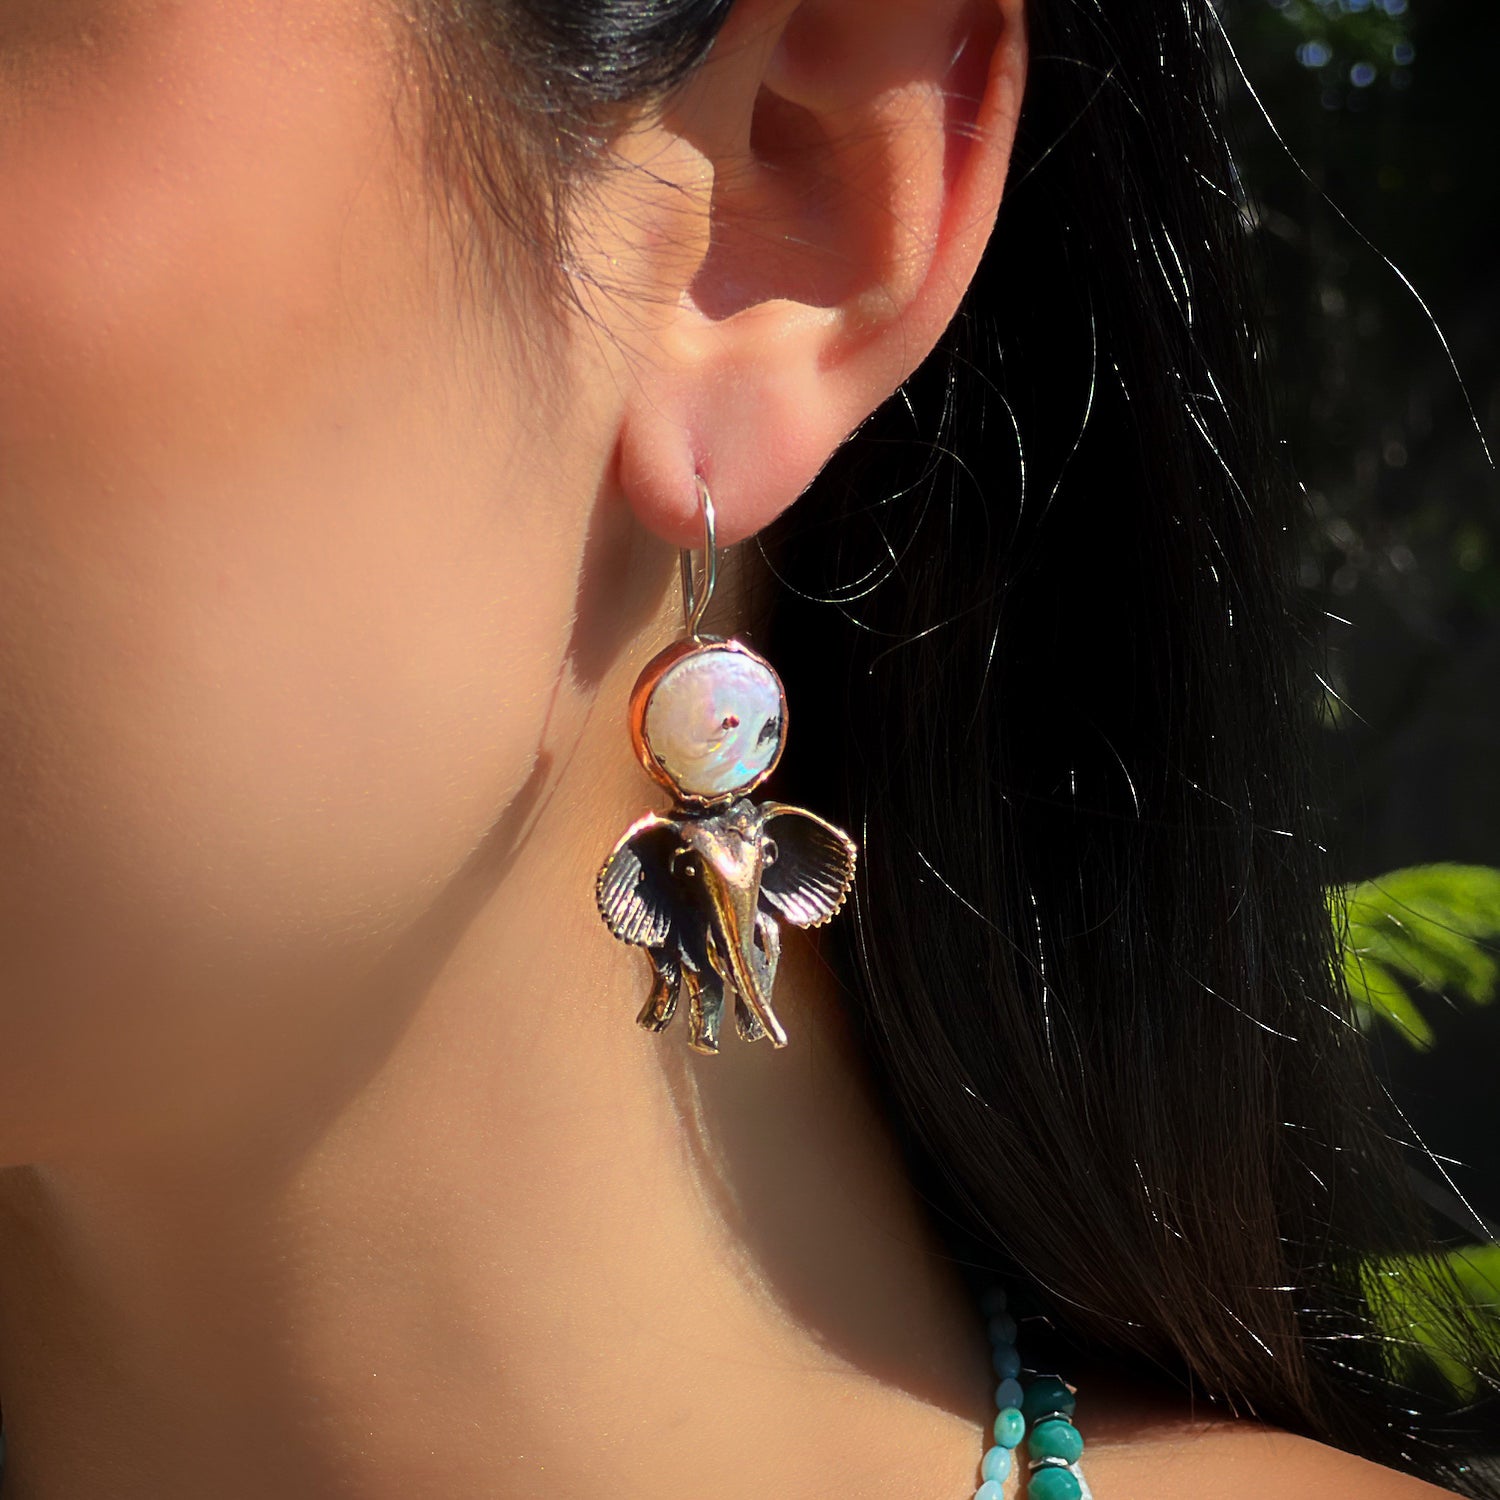 An image of a model wearing the Handmade Unique Spirit Elephant Earrings, demonstrating how they can effortlessly elevate any look with their whimsical design and eye-catching pearl gemstone accent.